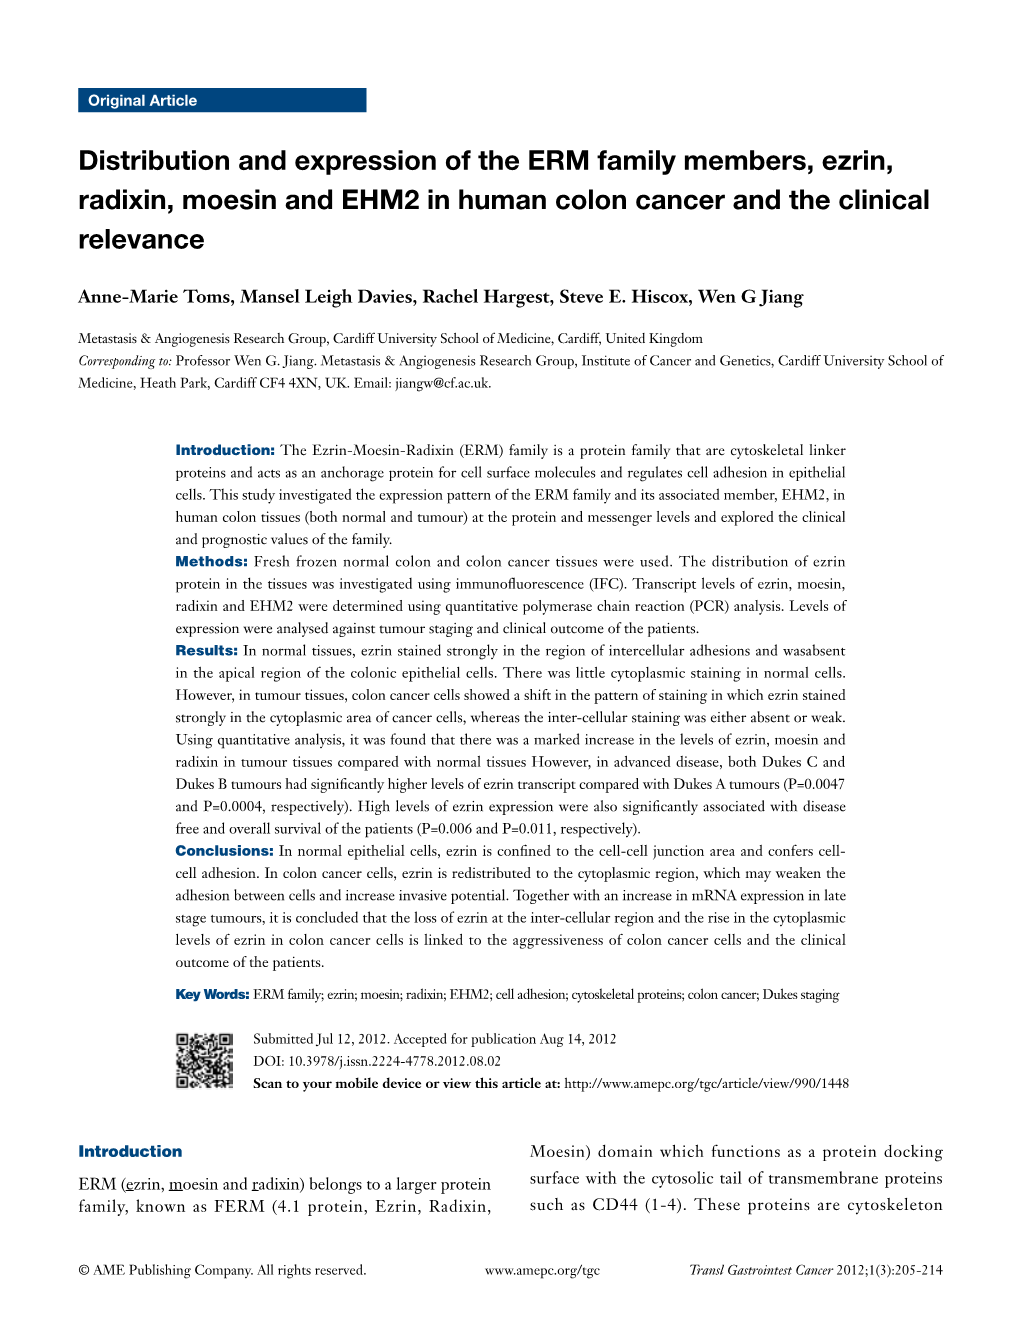 Distribution and Expression of the ERM Family Members, Ezrin, Radixin, Moesin and EHM2 in Human Colon Cancer and the Clinical Relevance